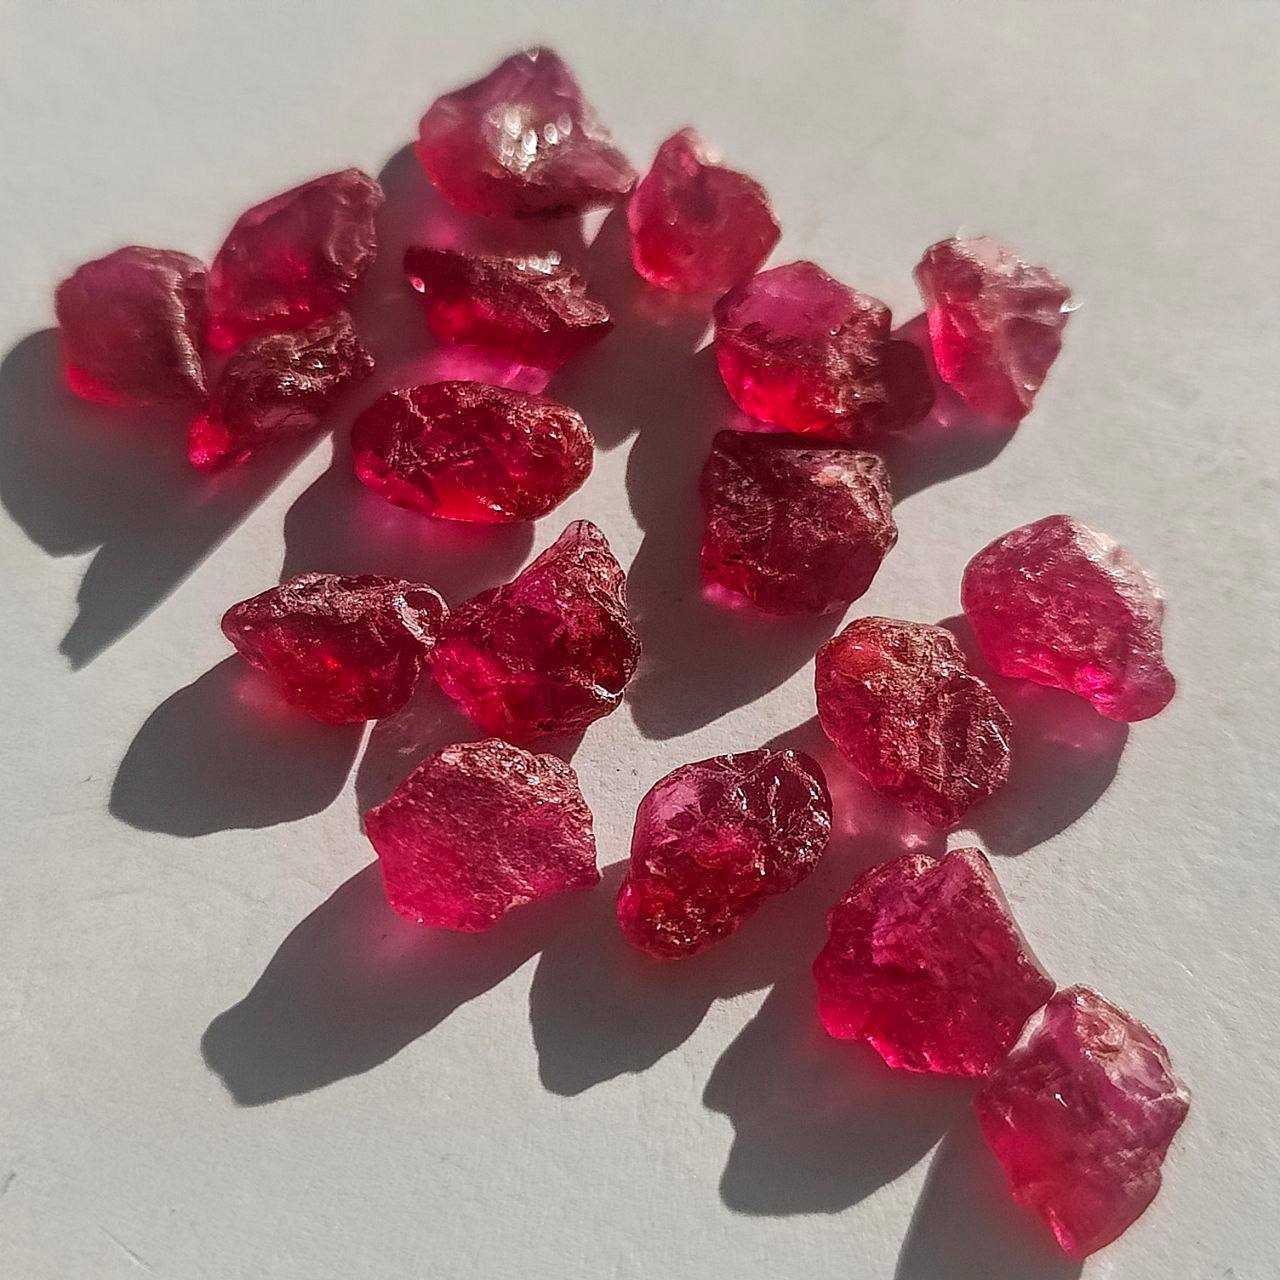 Mozambique Ruby Rough,
Ruby Rough